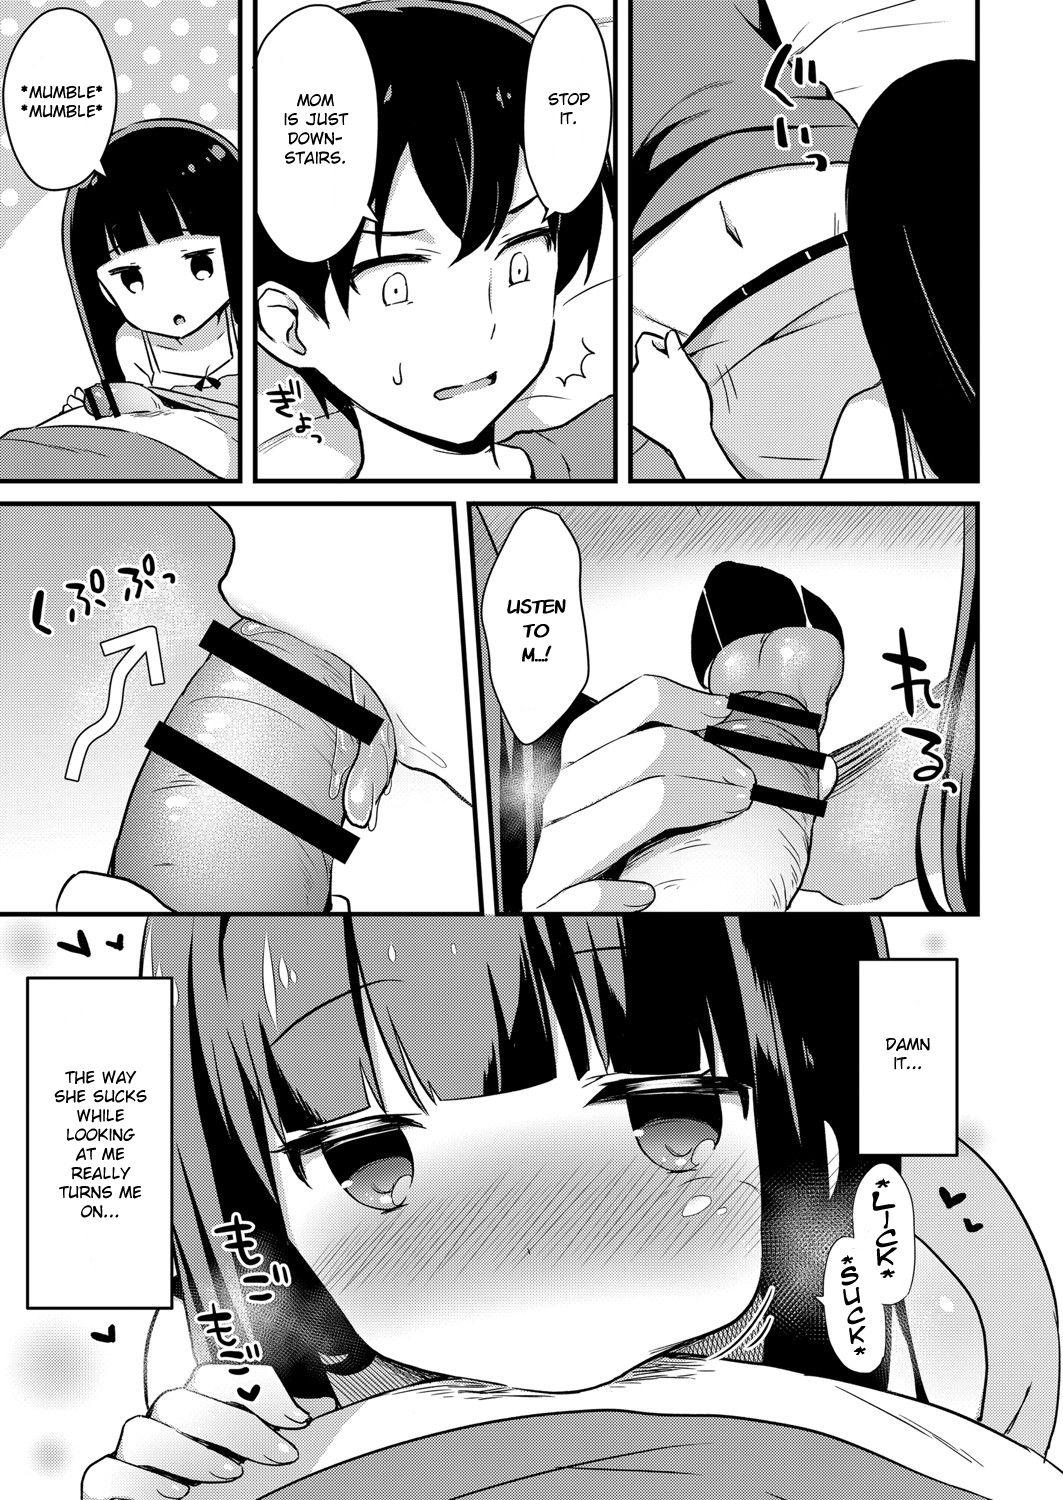 Magrinha [Tiger] Yuuwaku・Imouto #2 Onii-chan wa seishori gakari | Little Sister Temptation #2 Onii-chan is in Charge of My Libido Management (COMIC Reboot Vol. 07) [English] [Digital] Bubblebutt - Page 9